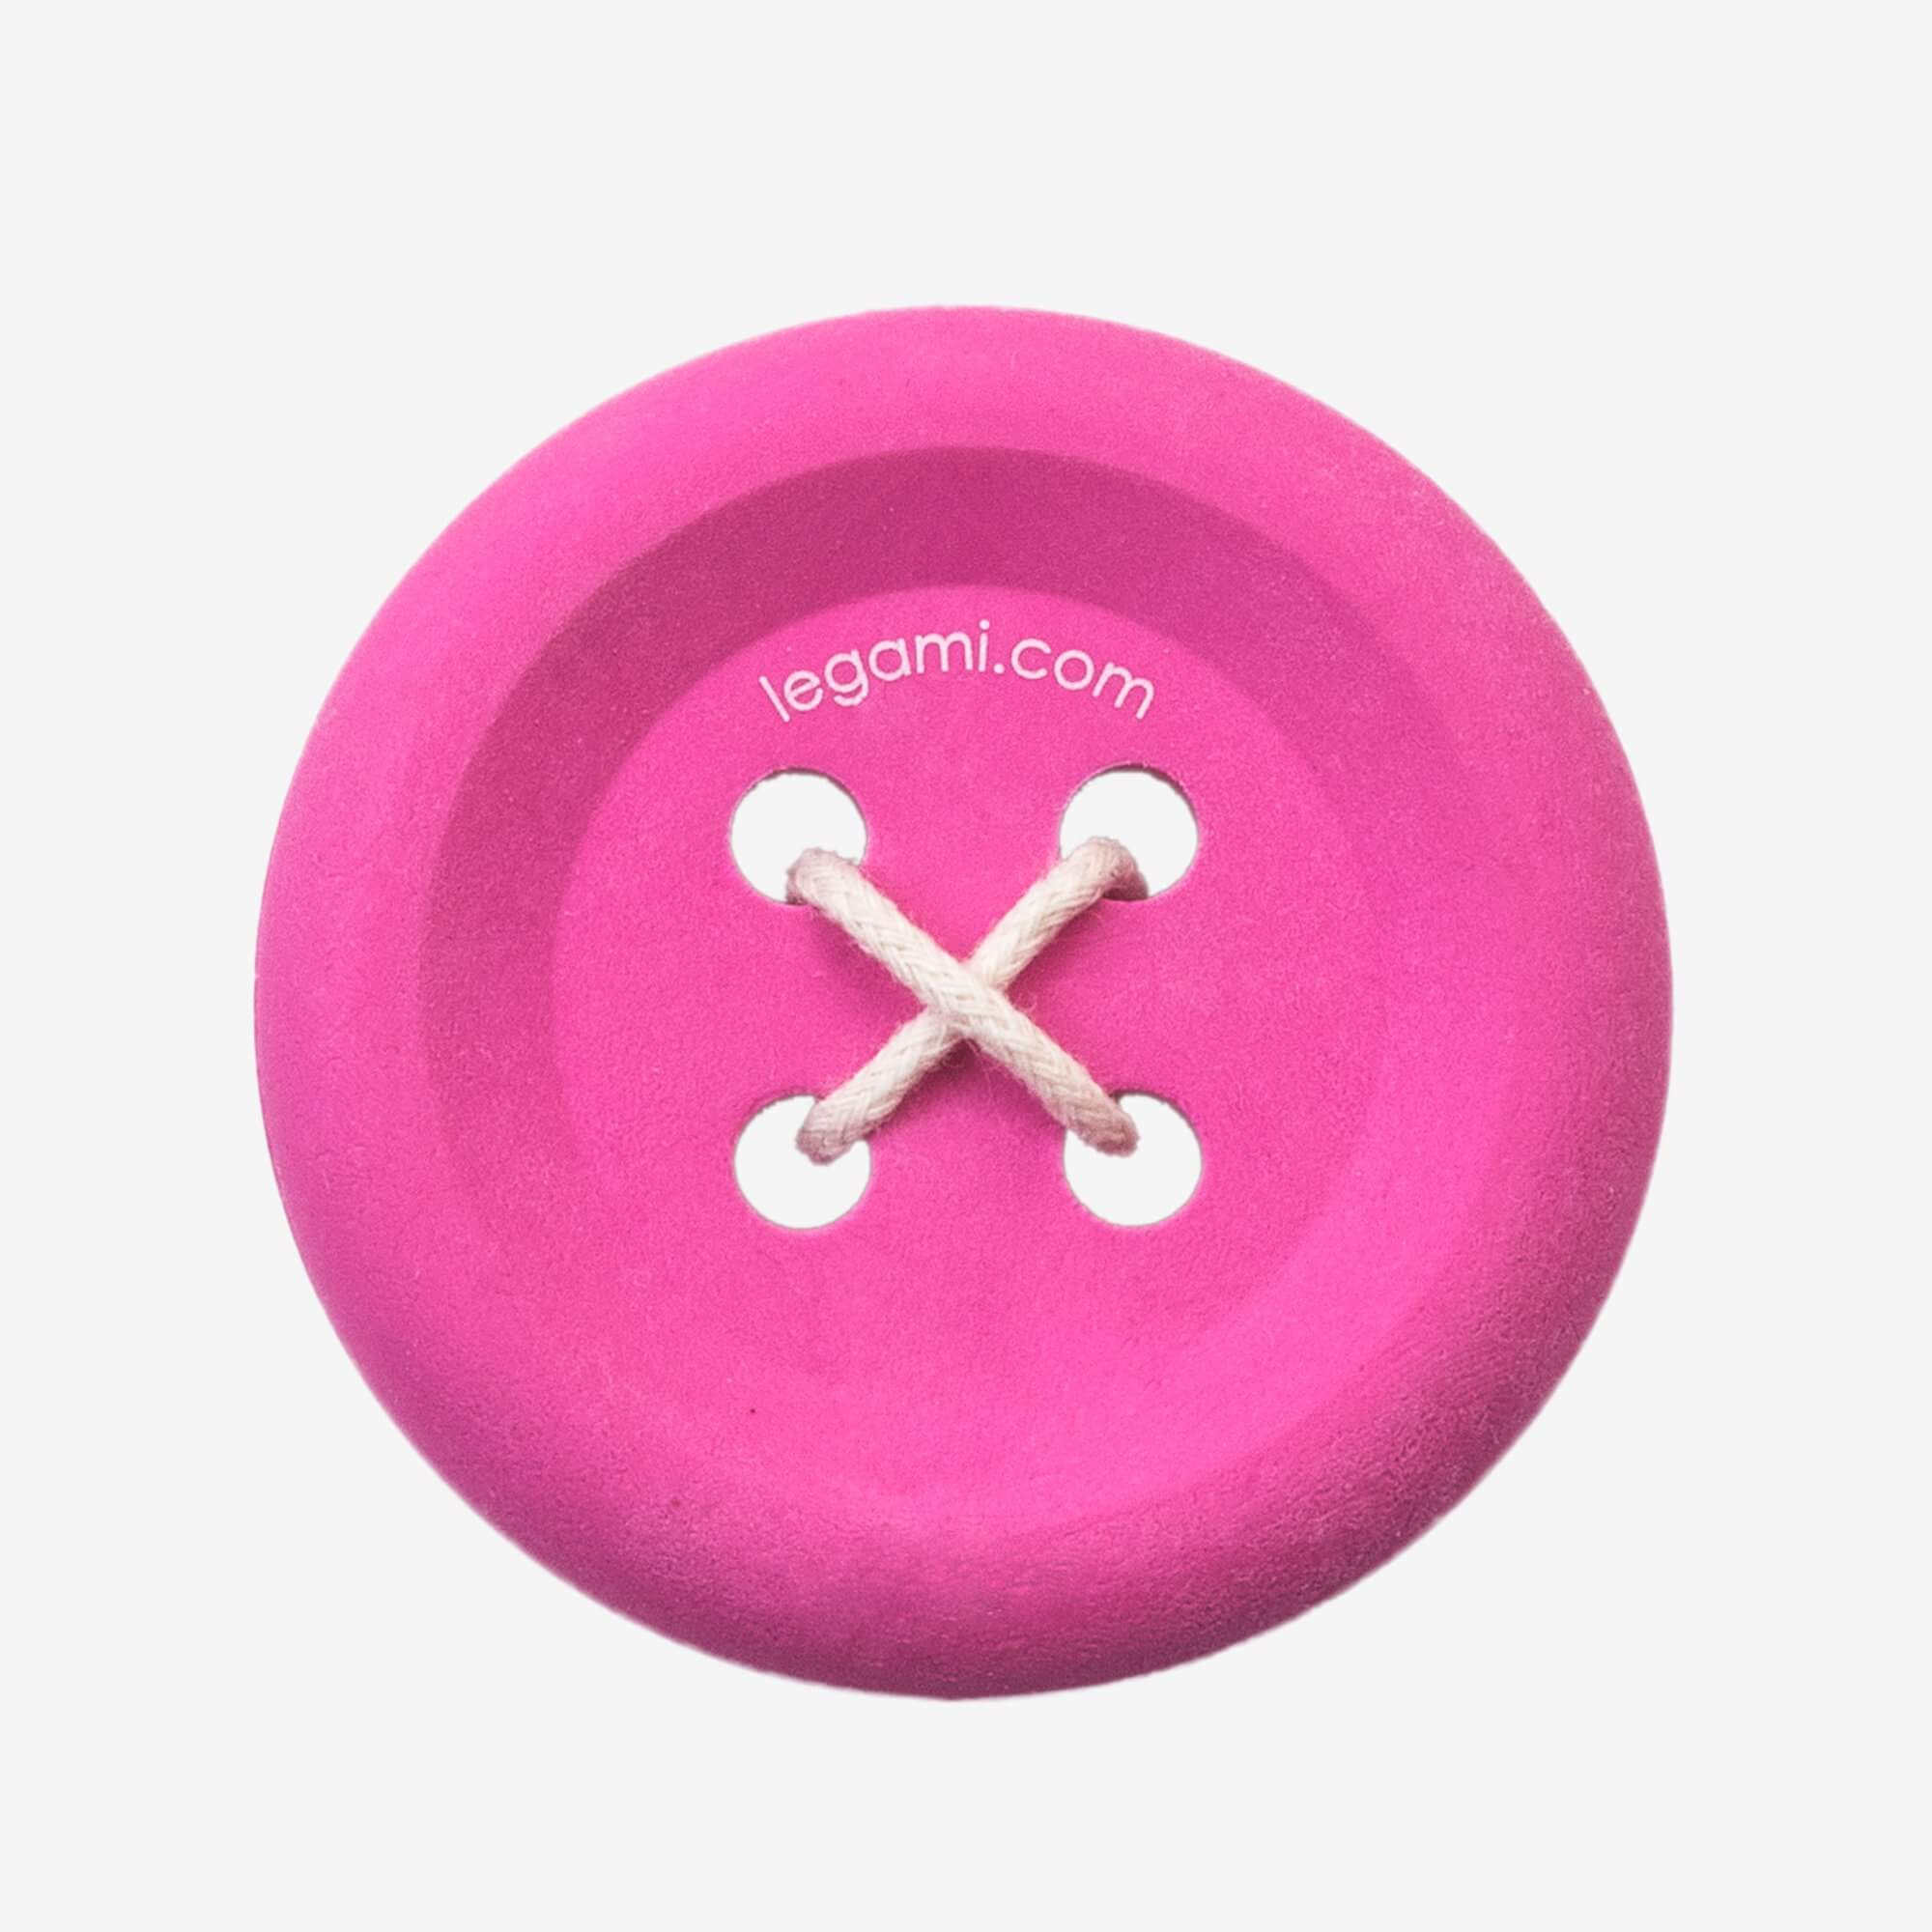 King of the Button - Maxi gomme Legami 